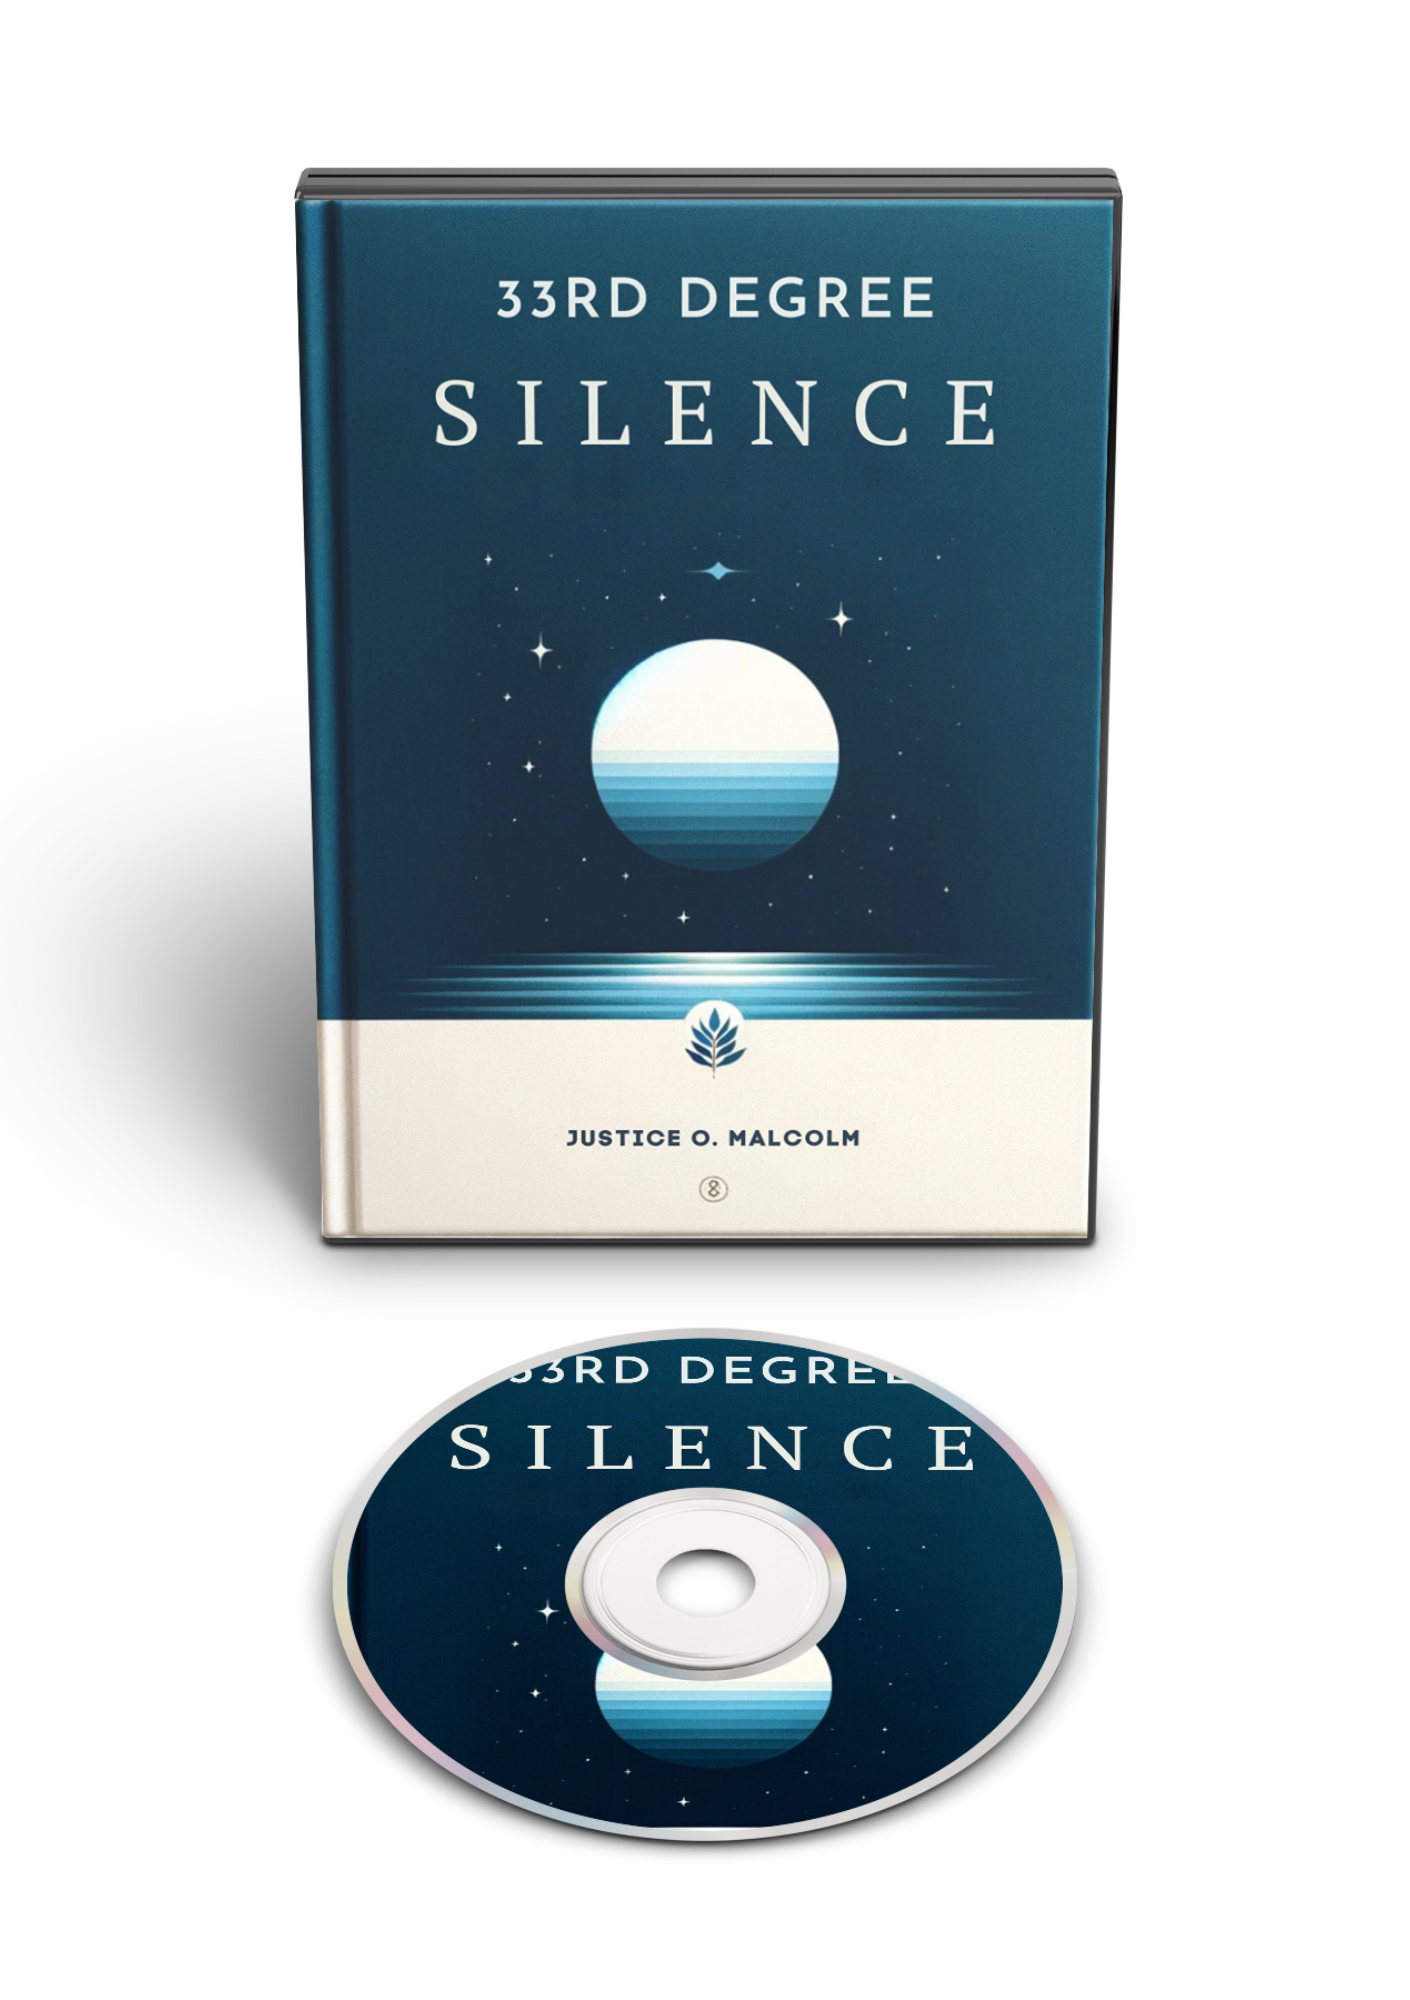 33rd Degree Silence: How to Mentally Control Your Life in Silence (Audiobook)